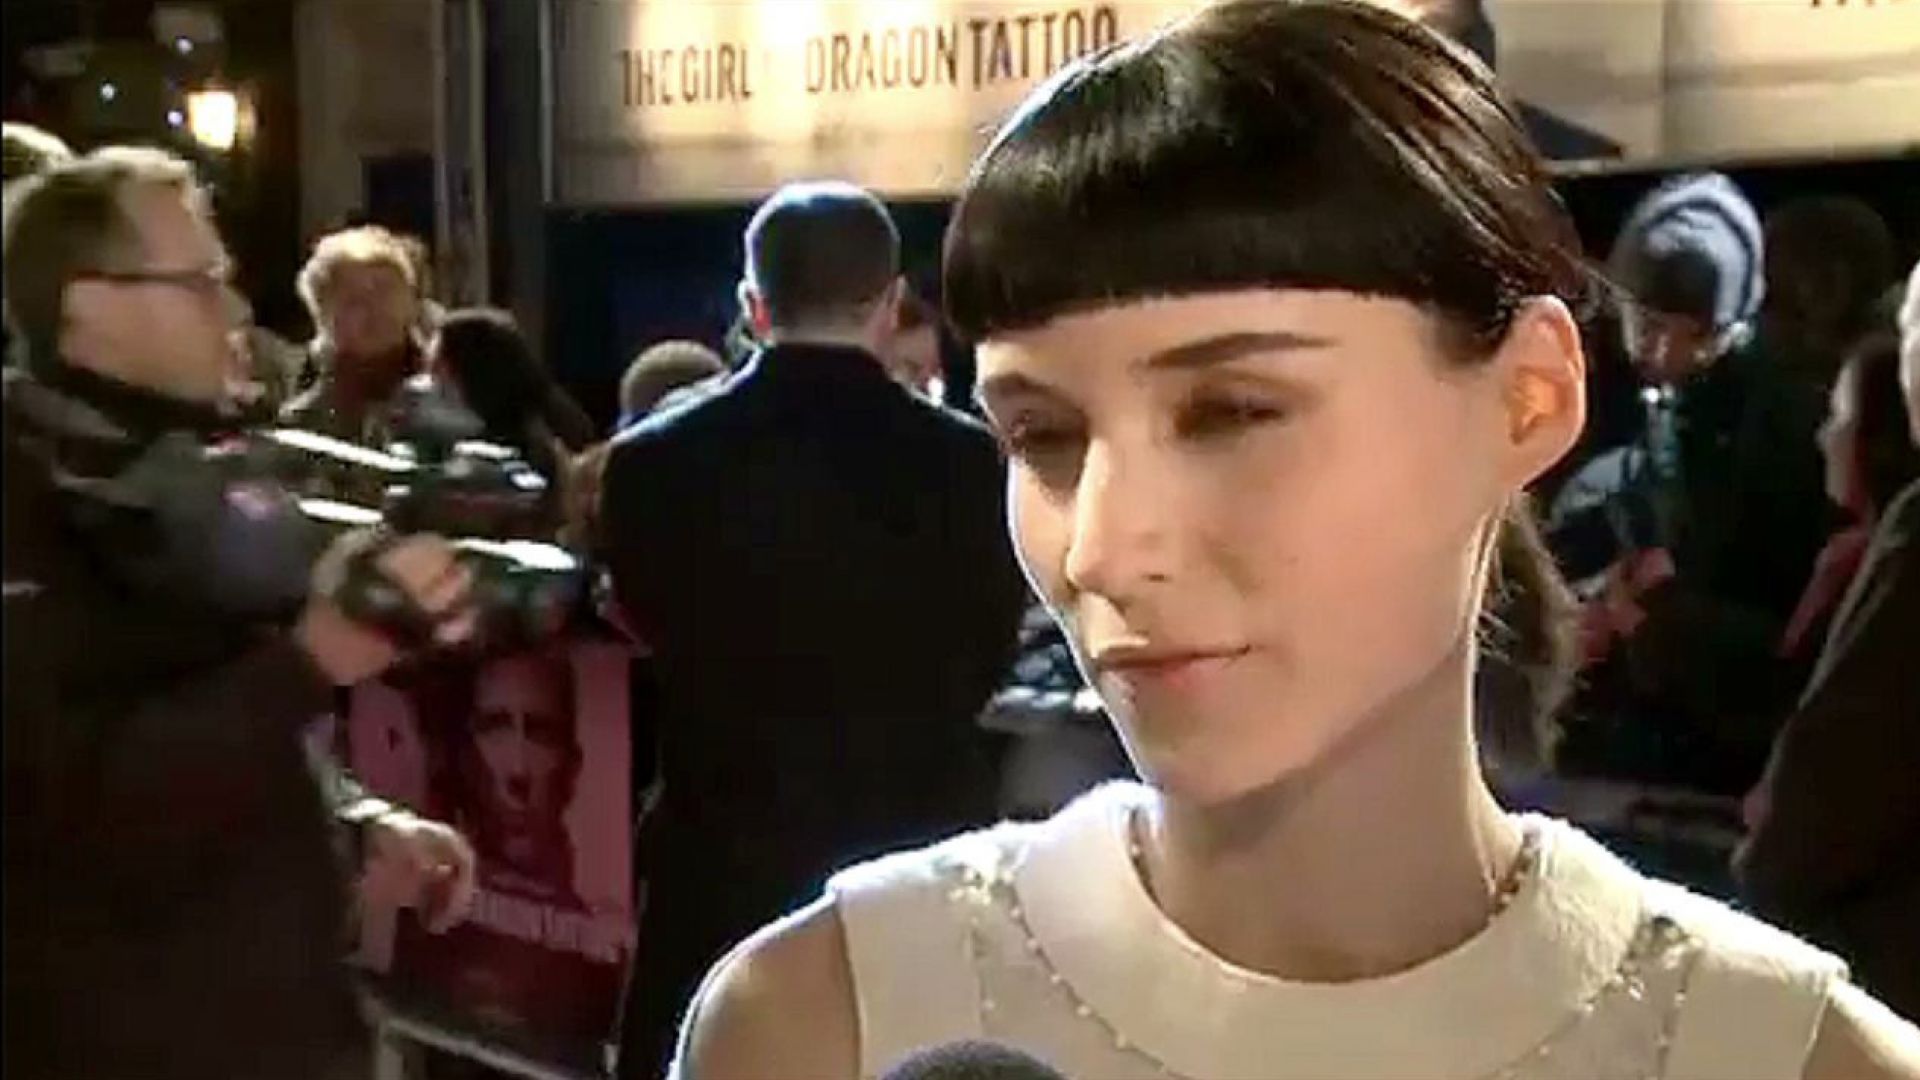 Daniel Craig, Rooney Mara and Geraldine James at the world premiere of The Girl with the Dragon Tattoo